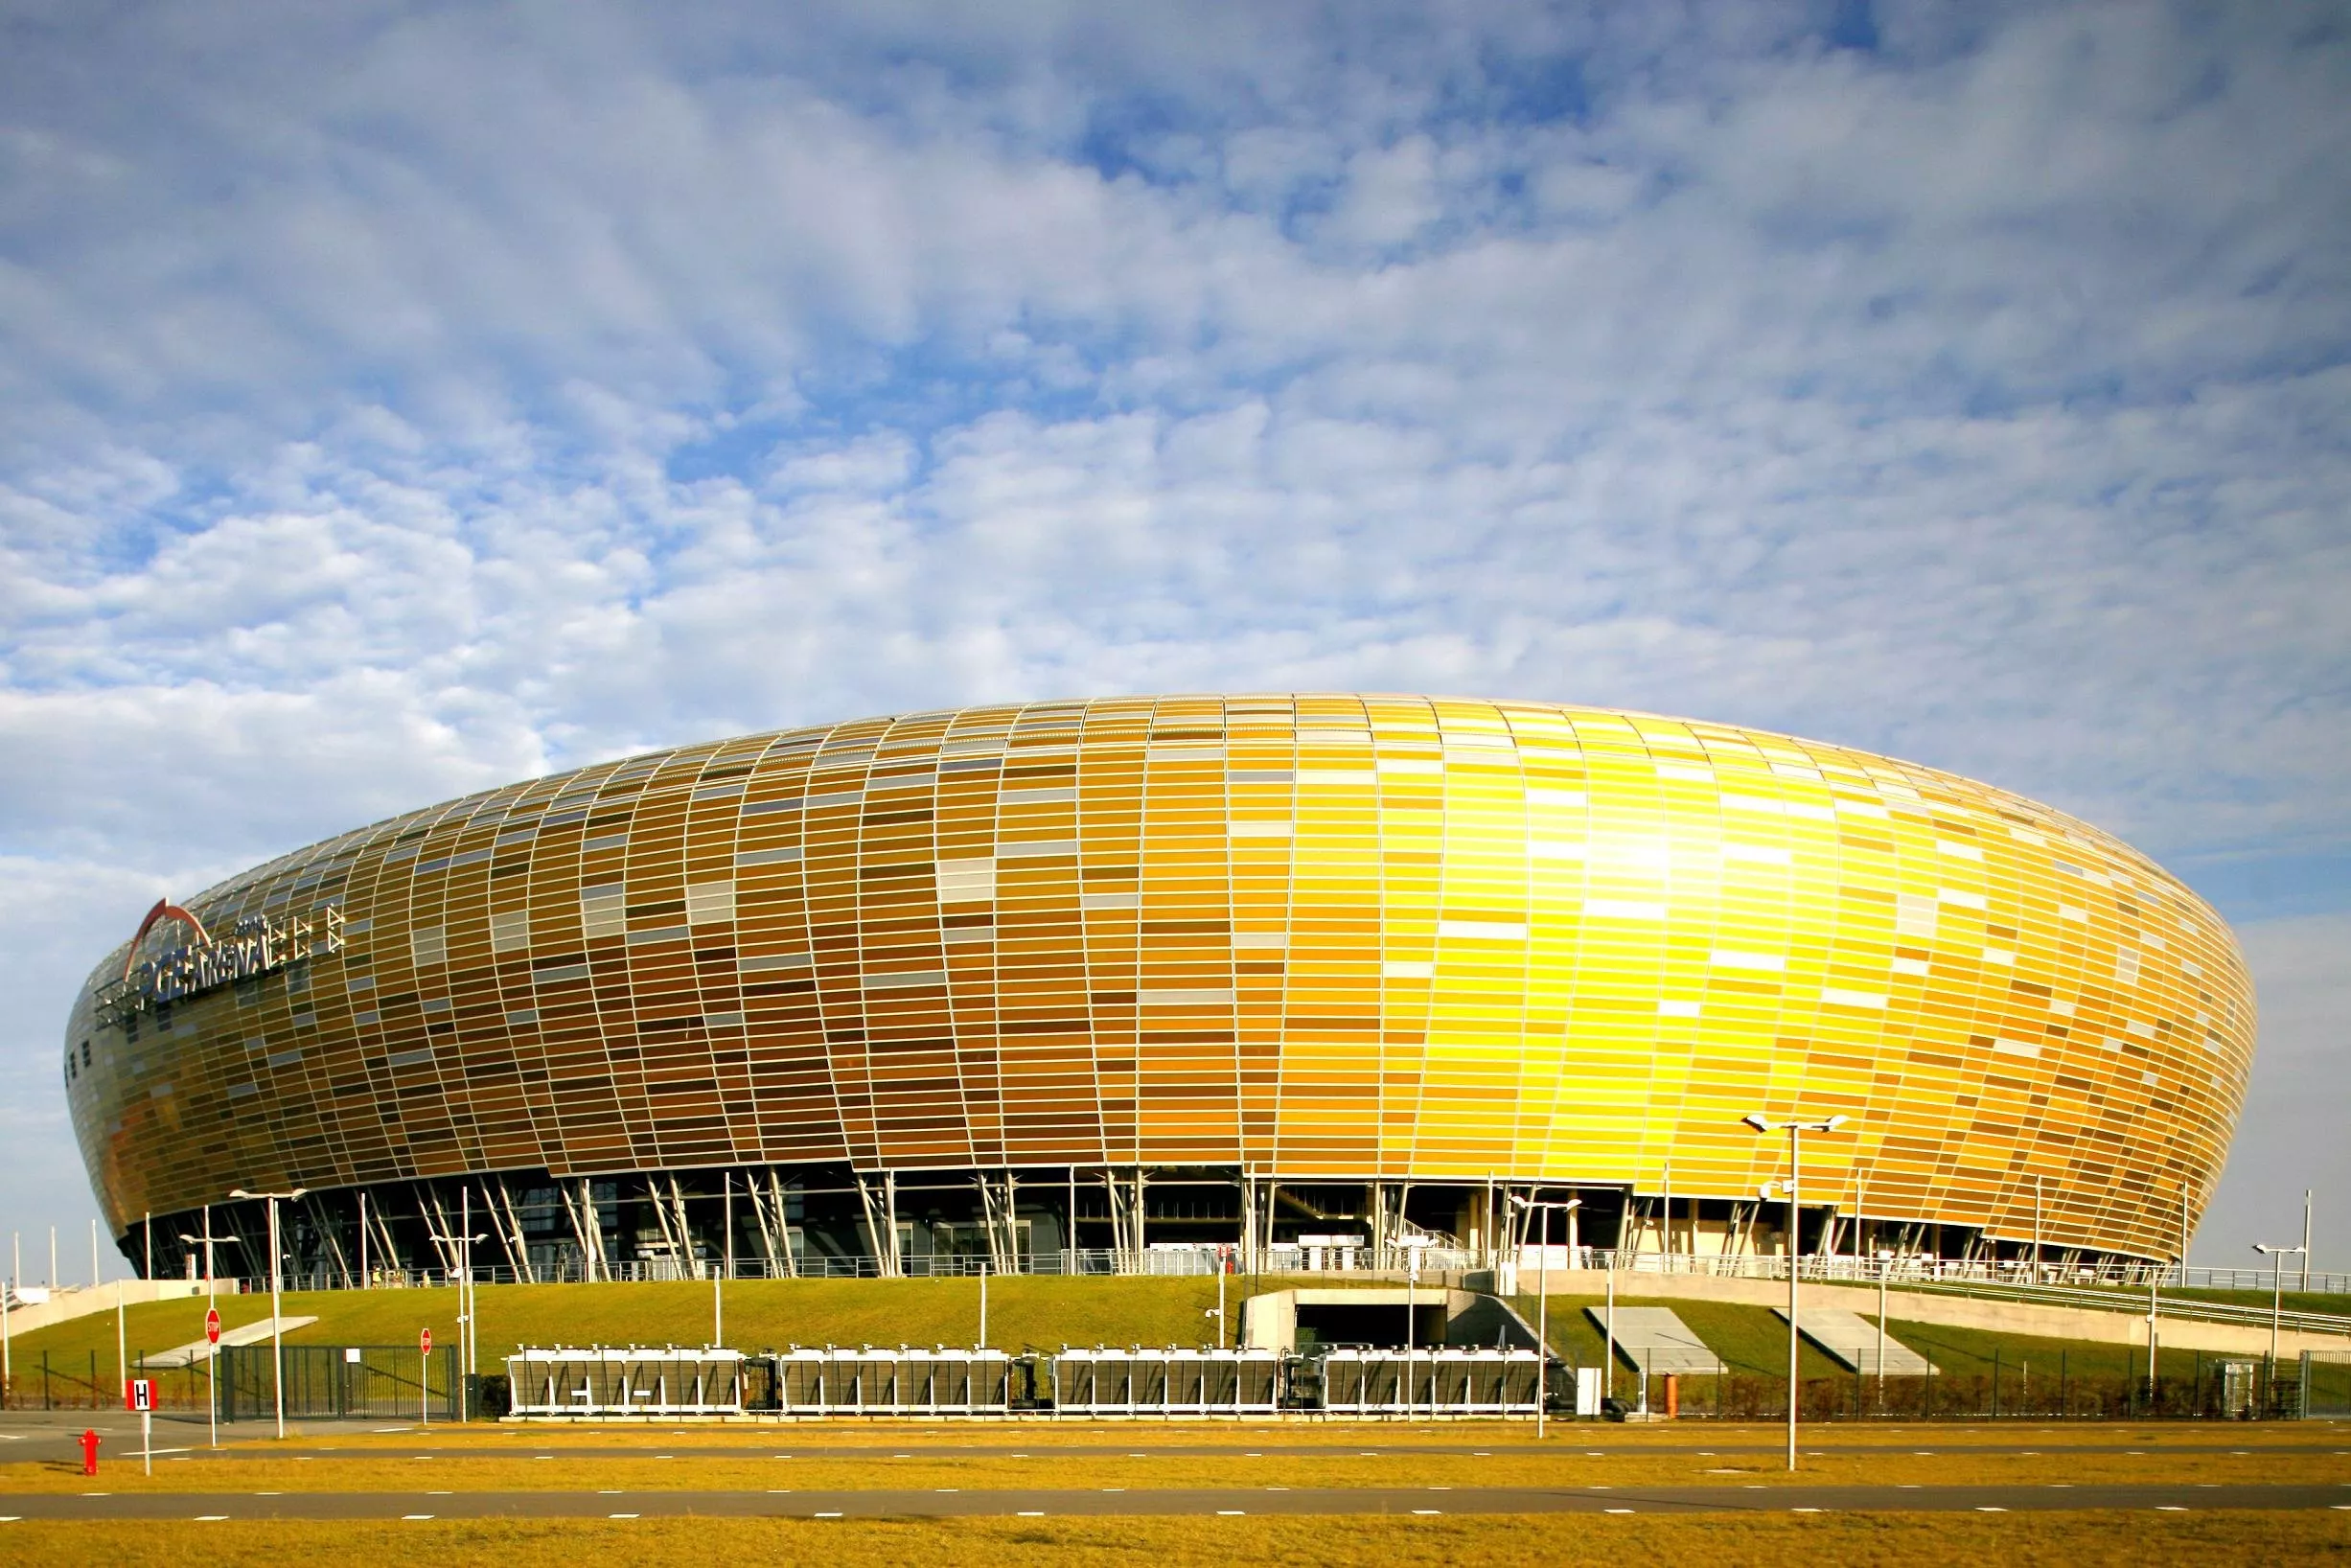 Pge Arena in Poland, Europe | Football - Rated 4.4